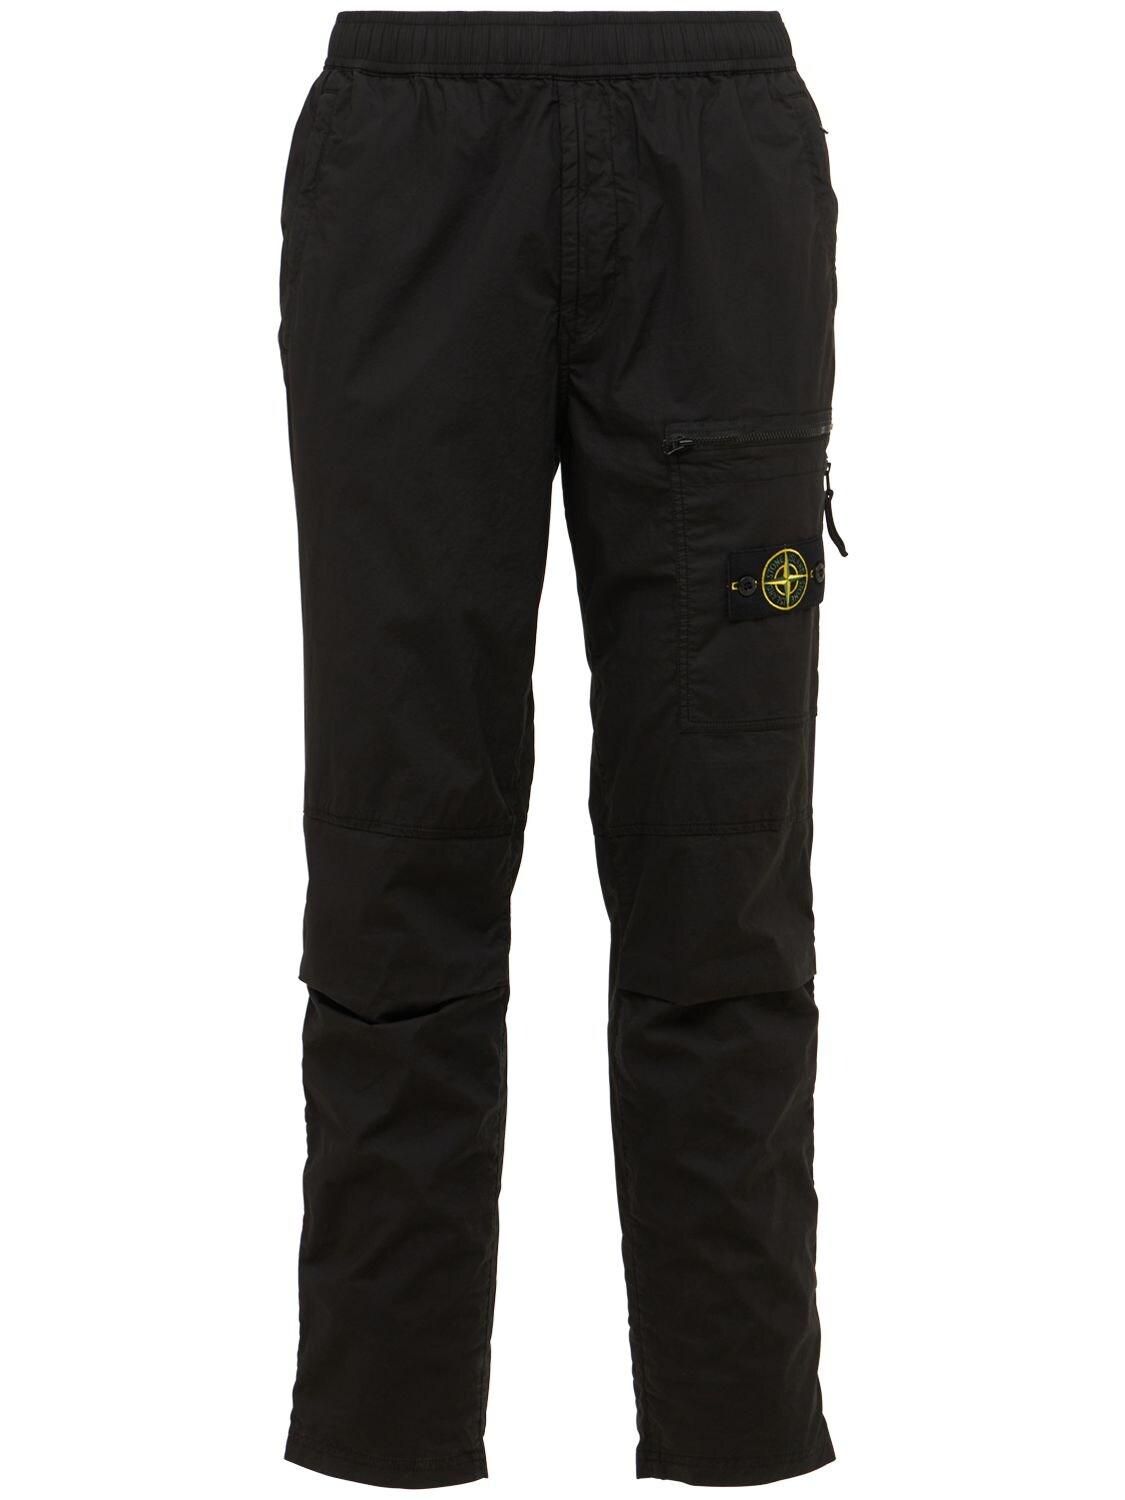 Stone Island Parachute Cargo Pants in Black for Men | Lyst